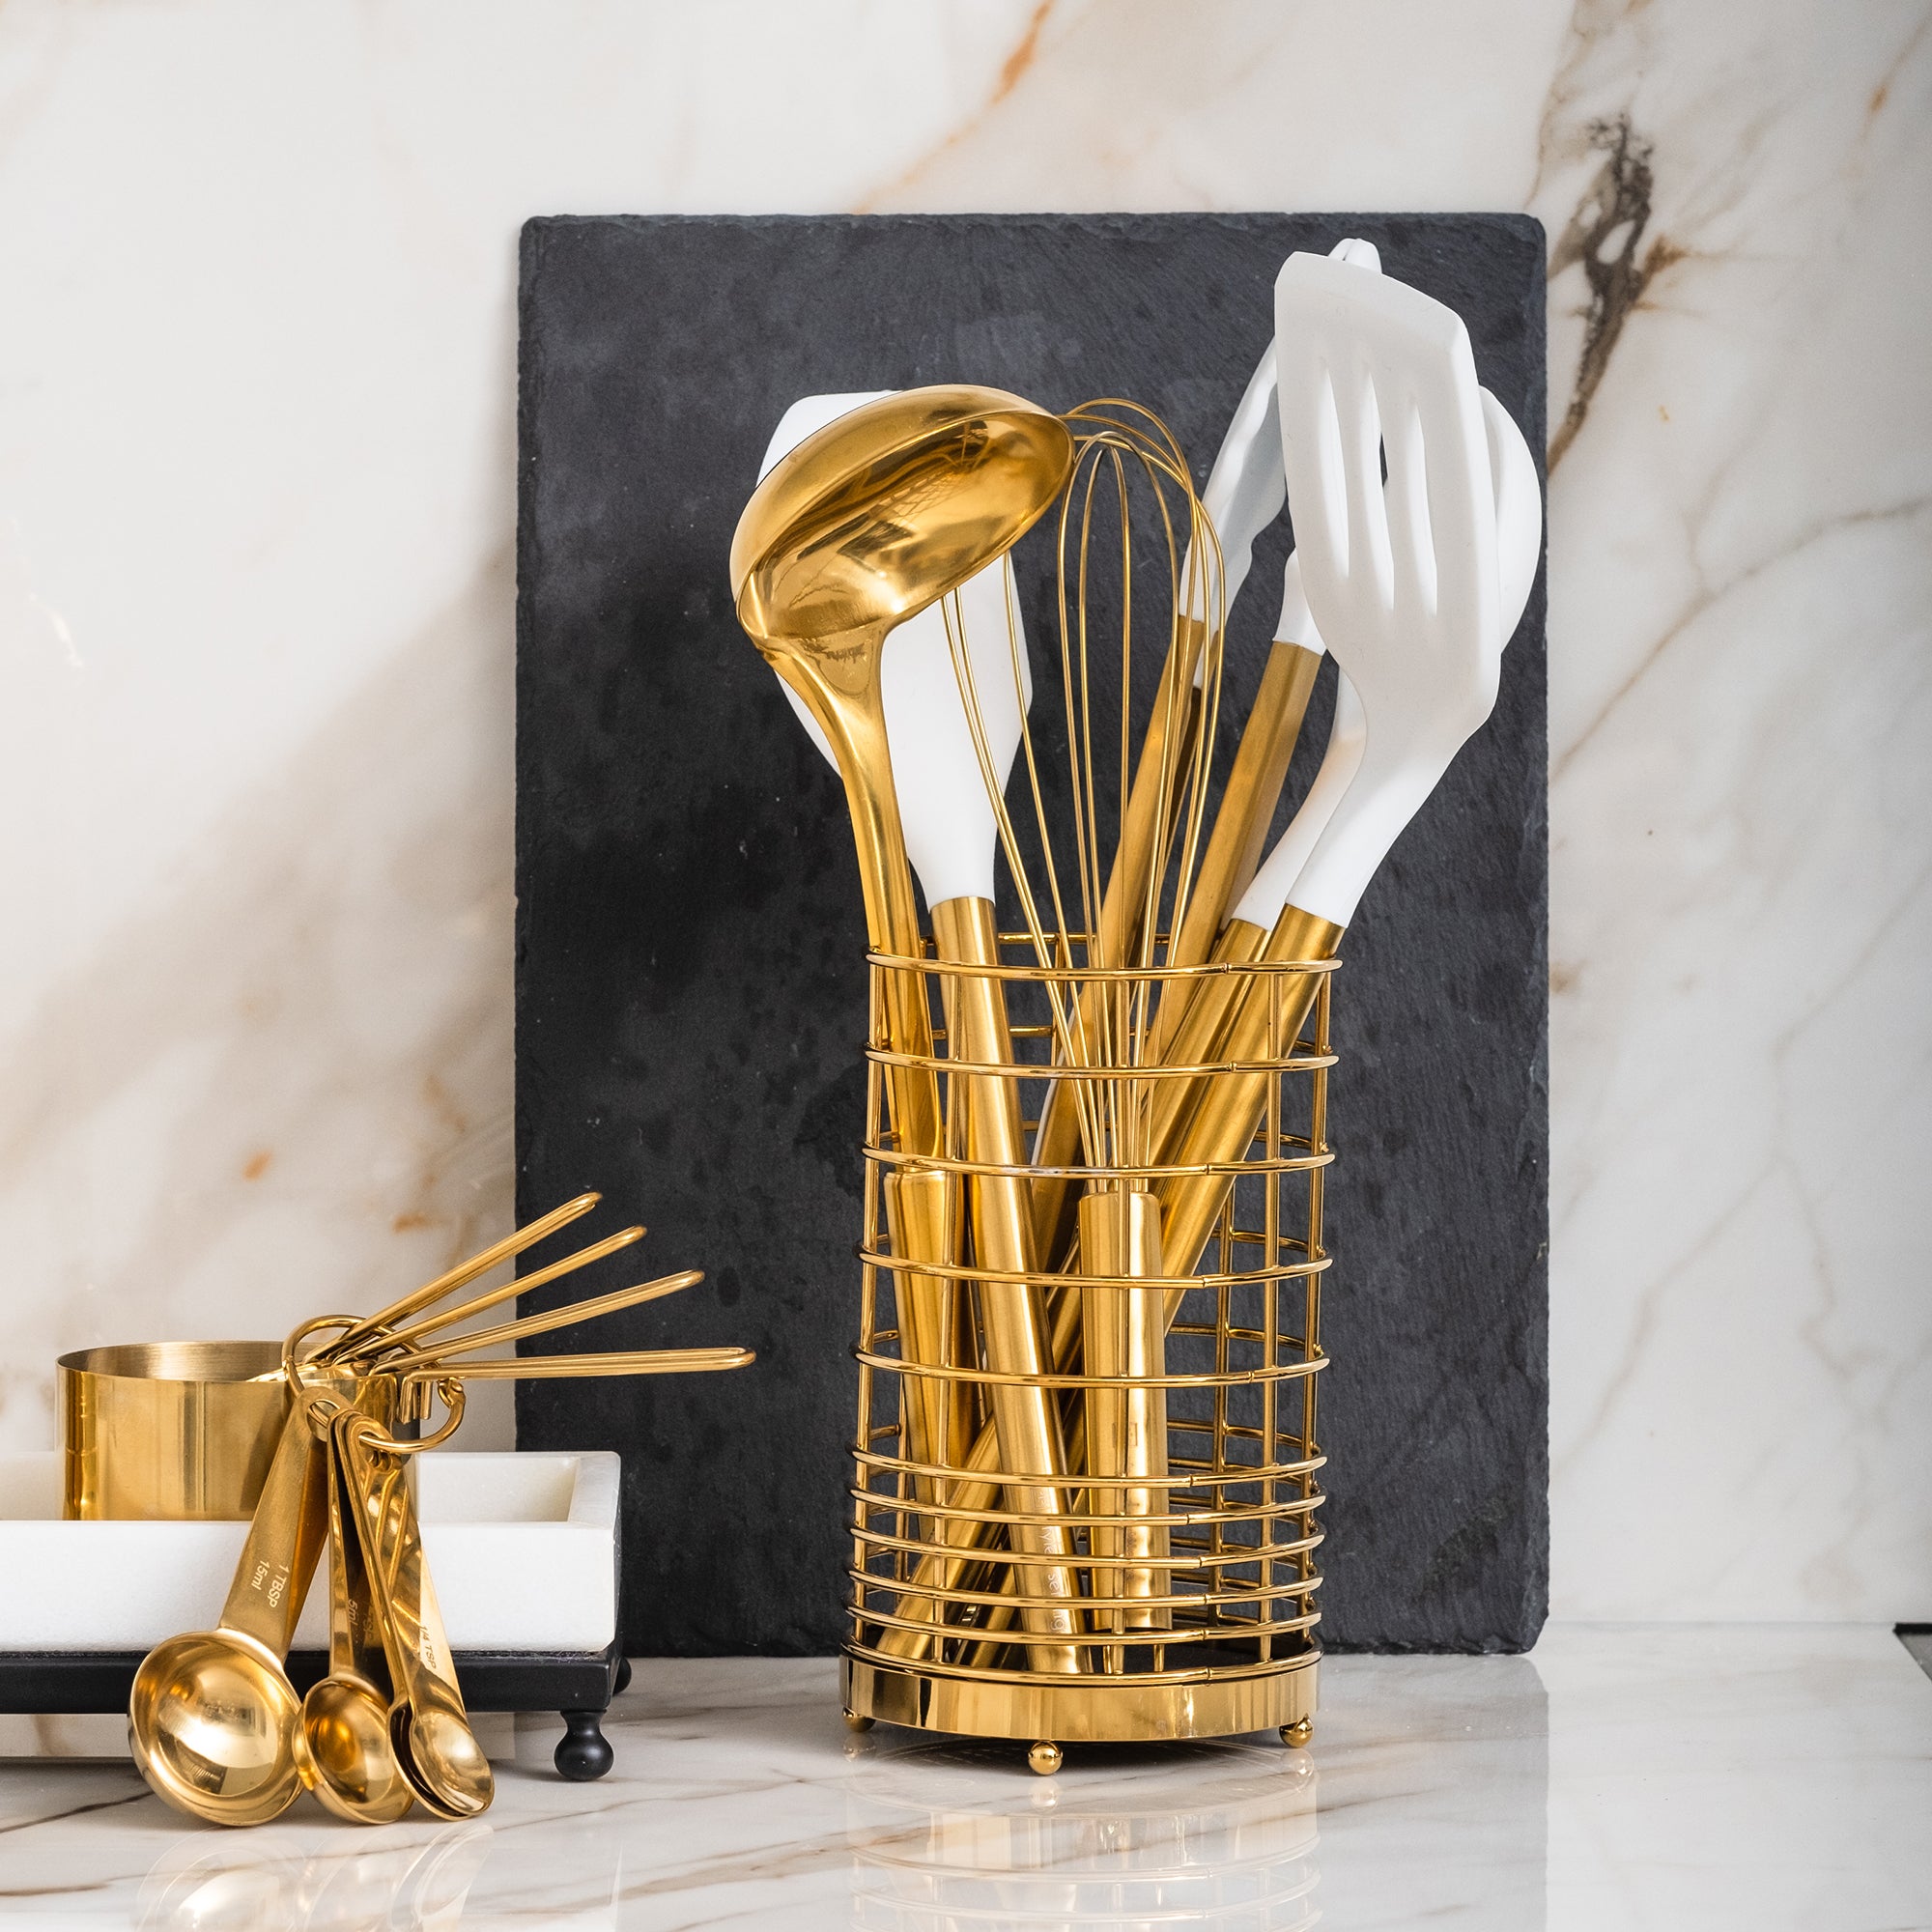 White and Brassy Gold Kitchen Utensils Set with Holder - Styled Settings